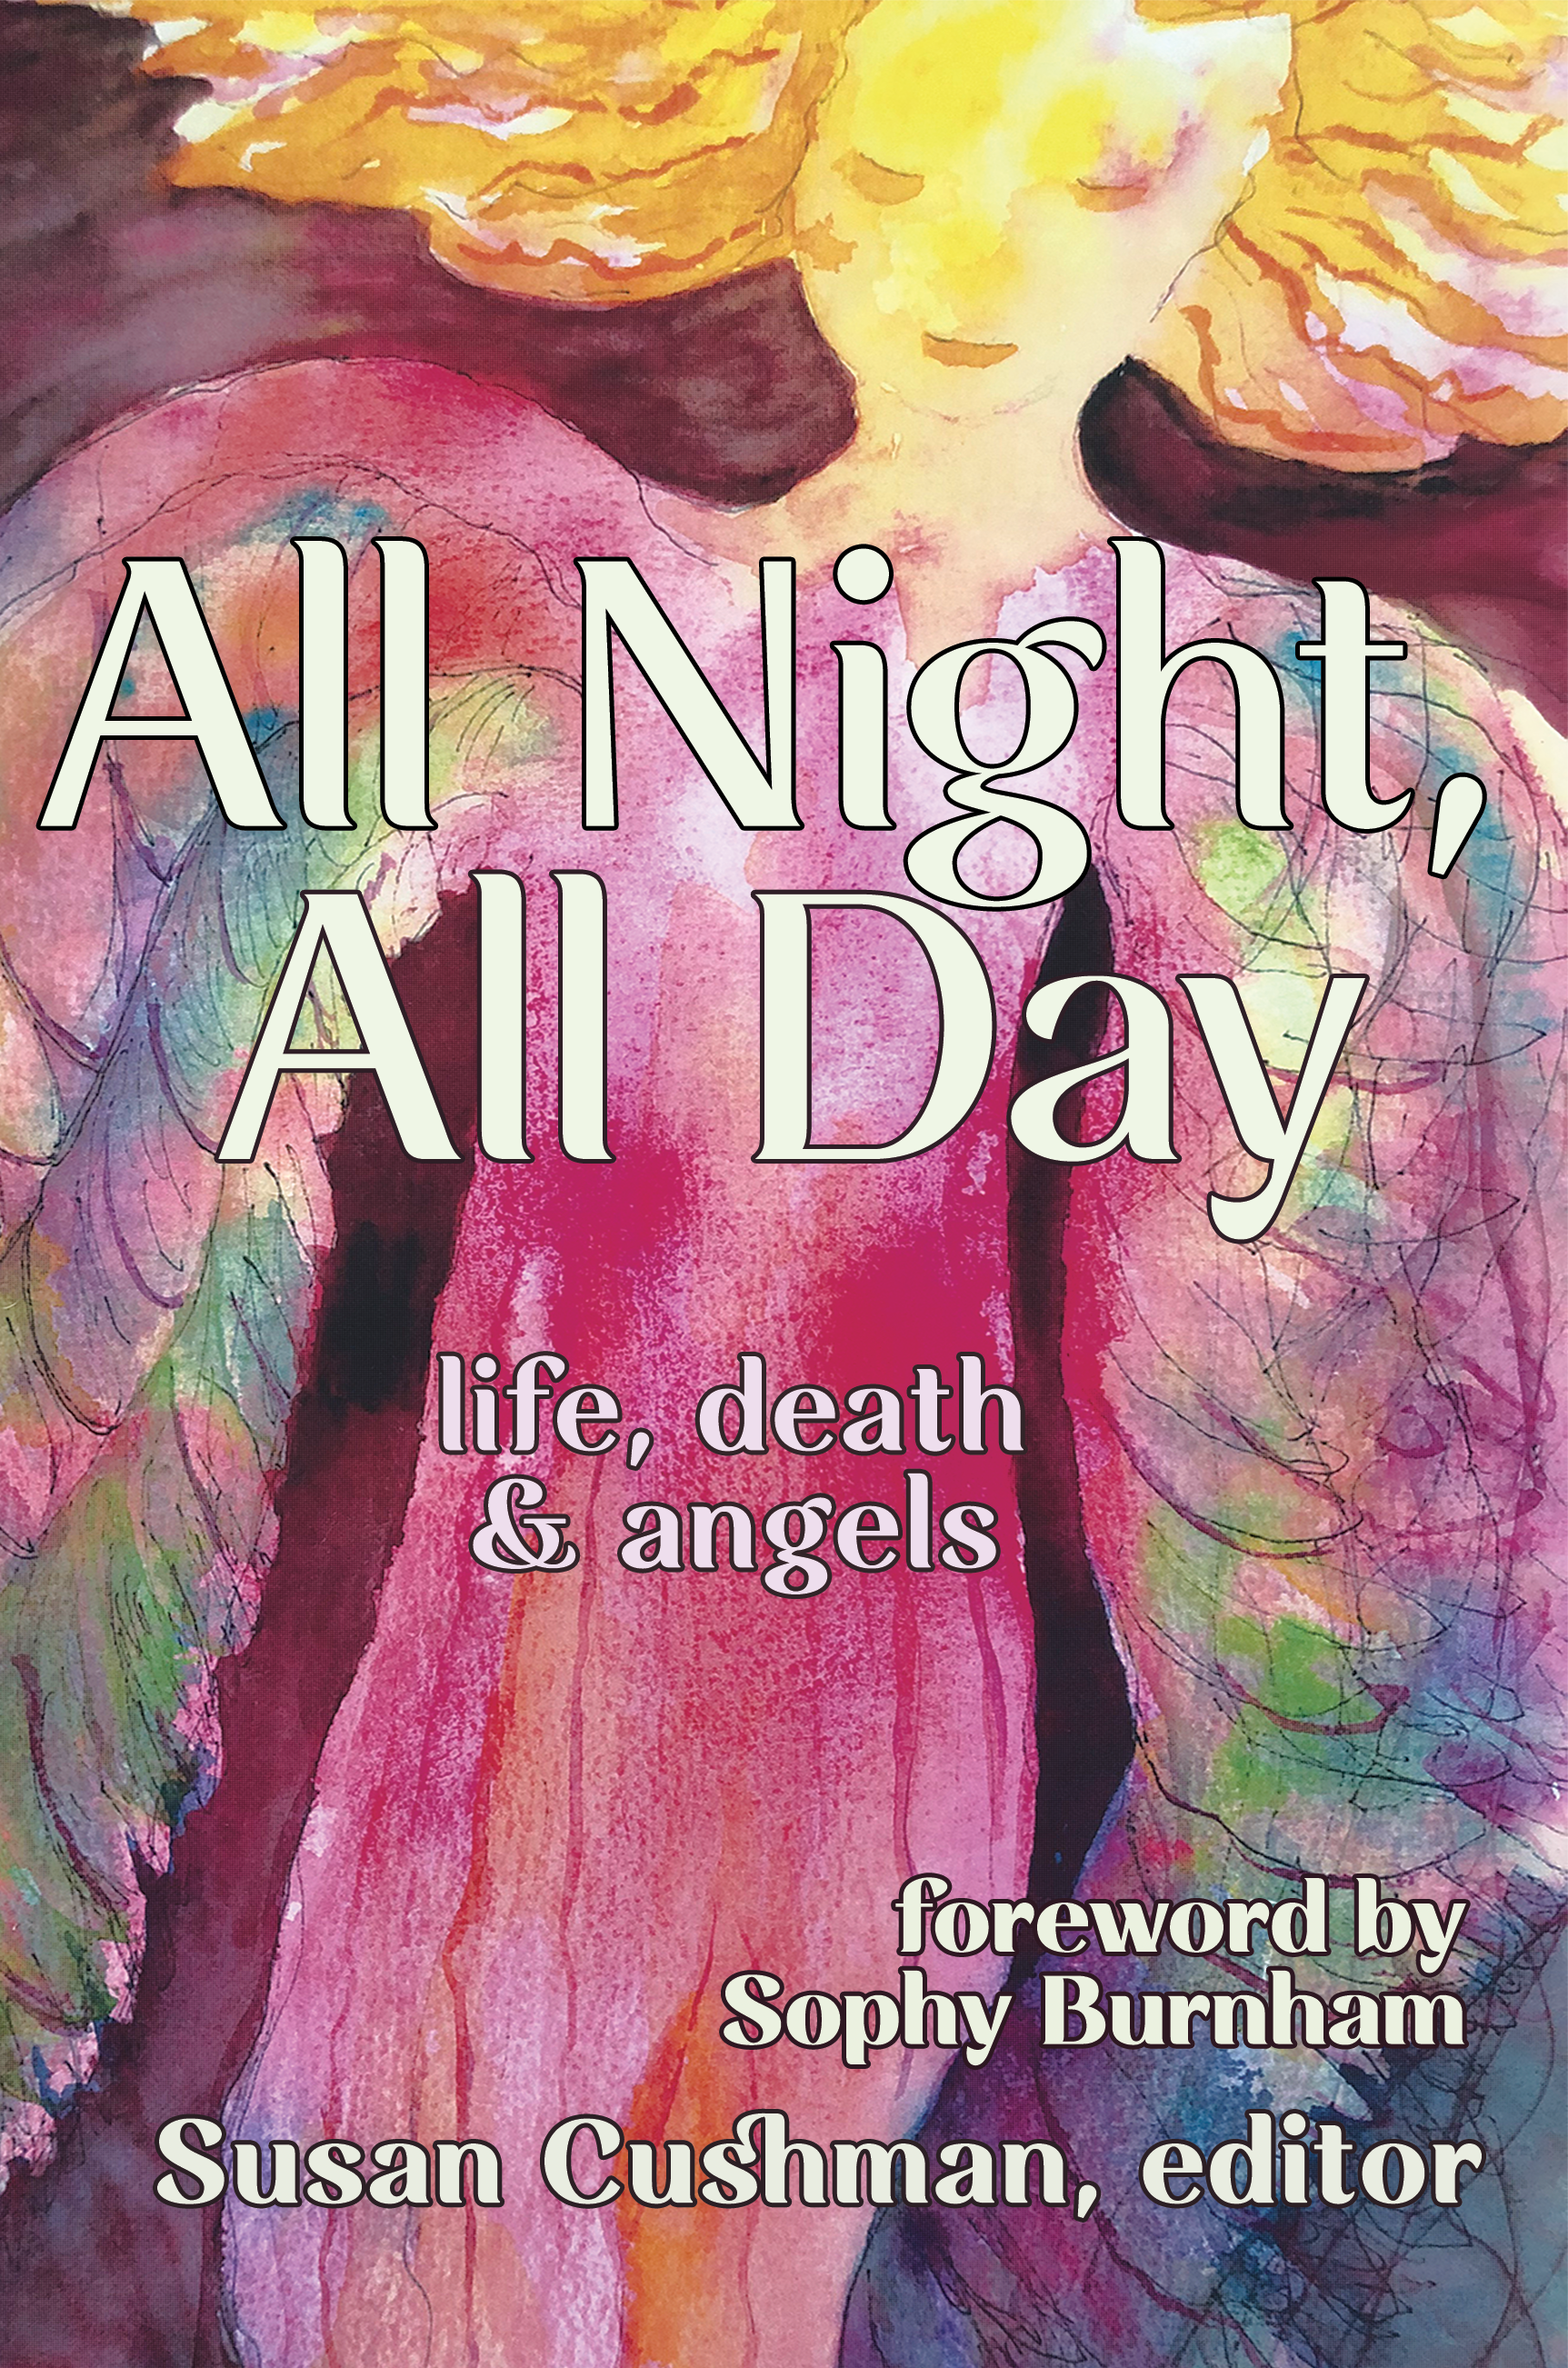 All Night, All Day: life, death & angels forward by Sophie Burnham, edited by Susan Cushman cover art is a water color angel in bright pink with gold entitled "Rainbow Angel" by Nancy Anne Mardis